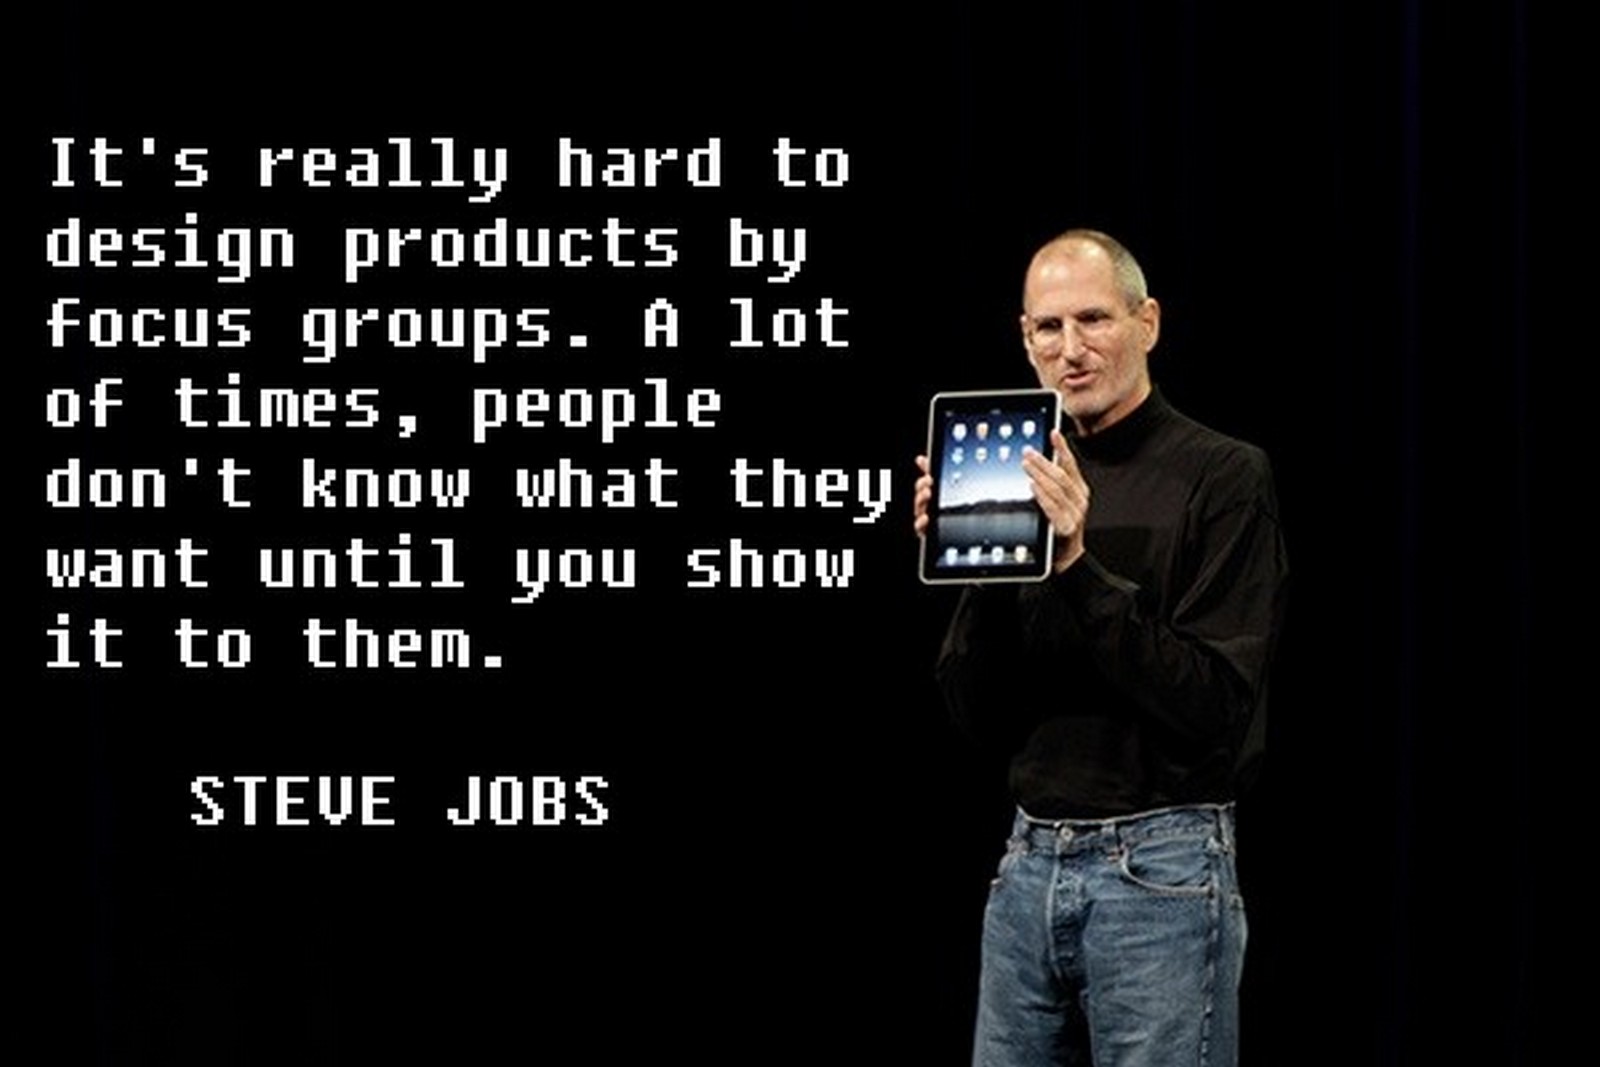 19 Best Steve Jobs Quotes - "It's really hard to design products by focus groups. A lot of times, people don't know what they want until you show it to them."